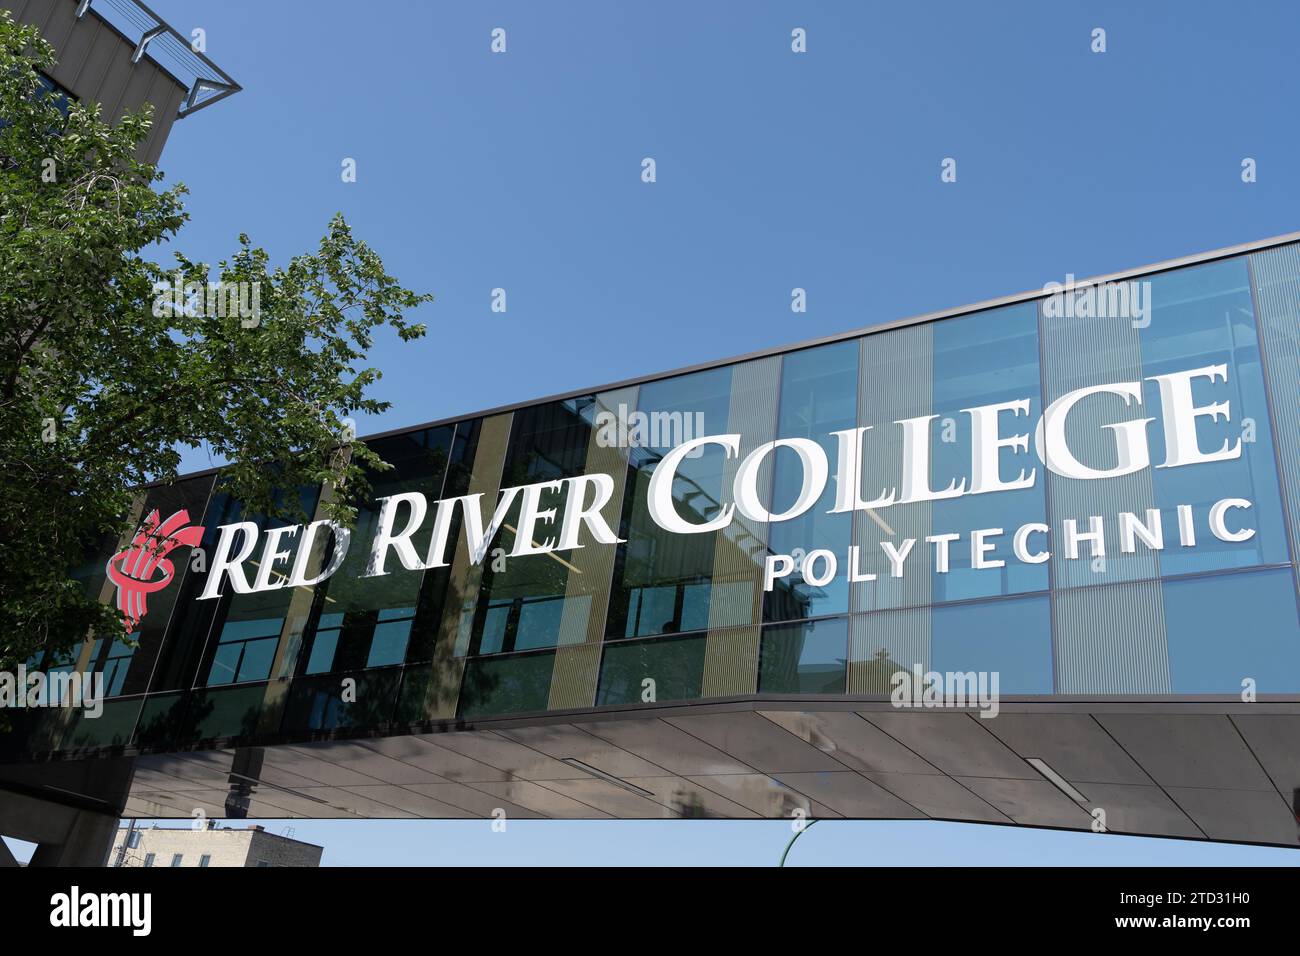 Red River College Polytechnic sign on the building in Winnipeg, Manitoba, Canada Stock Photo